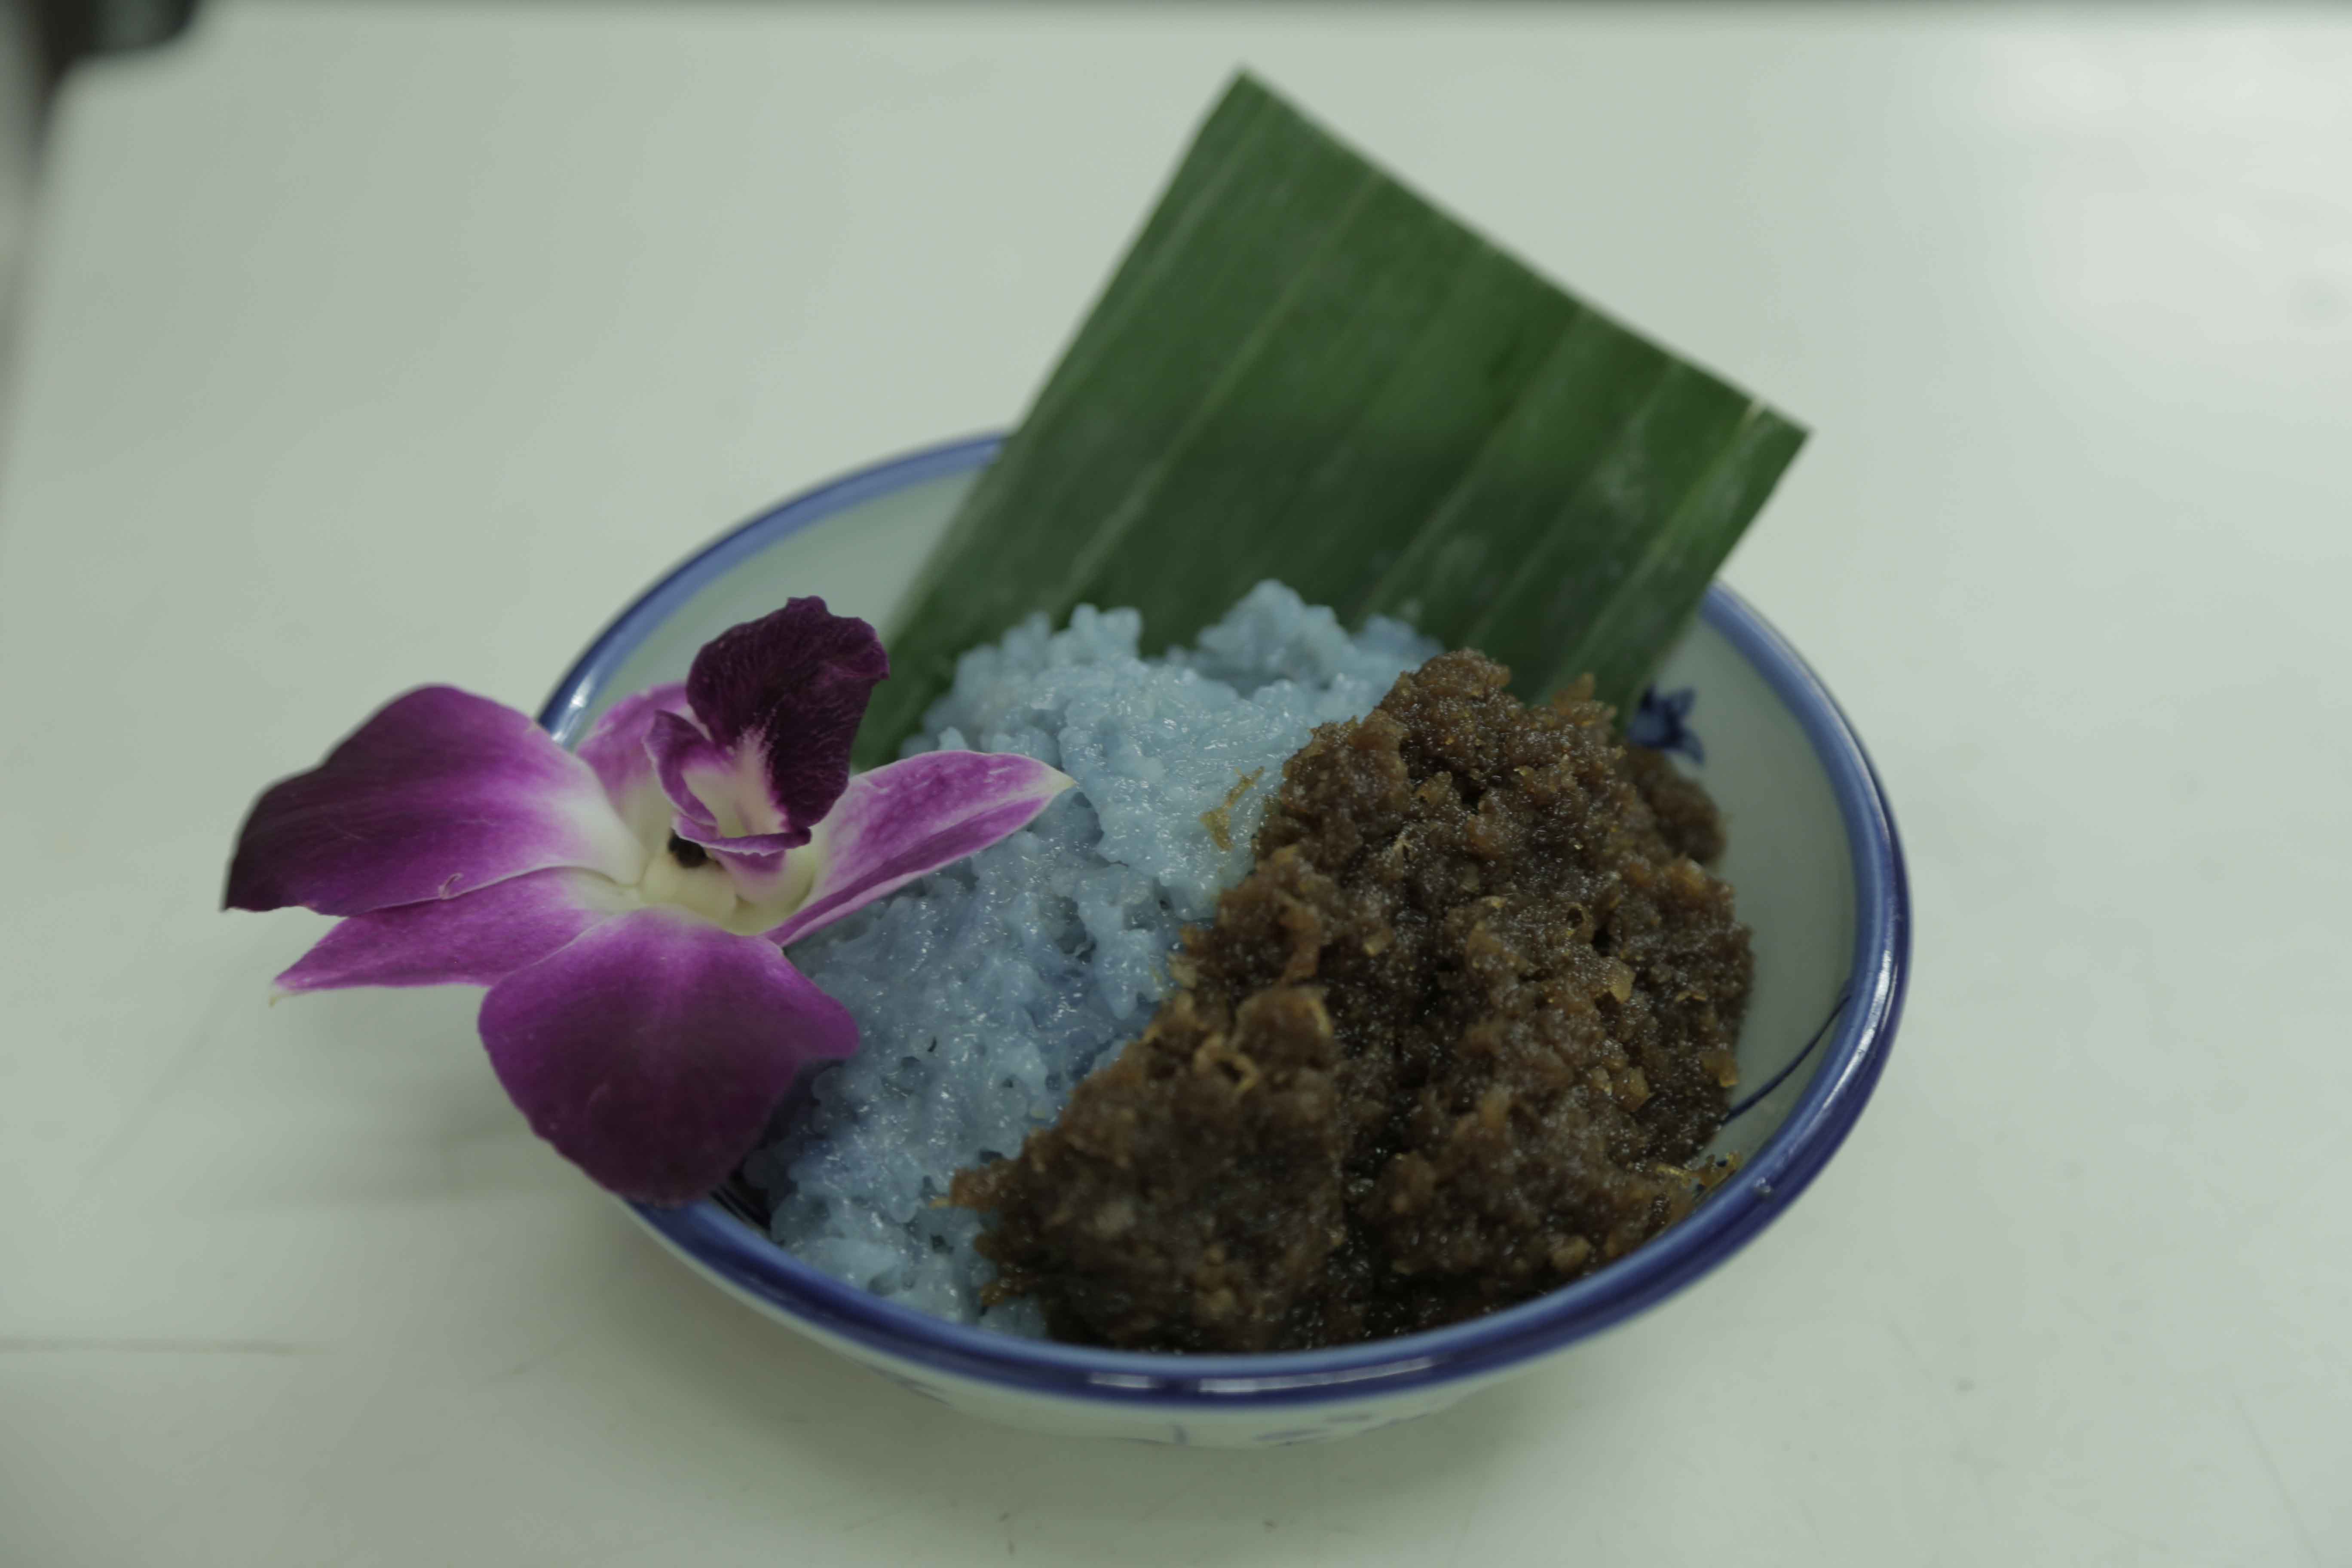 A bowl of pulot enti kelapa, a classic Peranakan dessert made of glutinous rice, coconut, and gula melaka. The blue tinge of the rice comes from the bunga telang, or the butterfly pea flower.